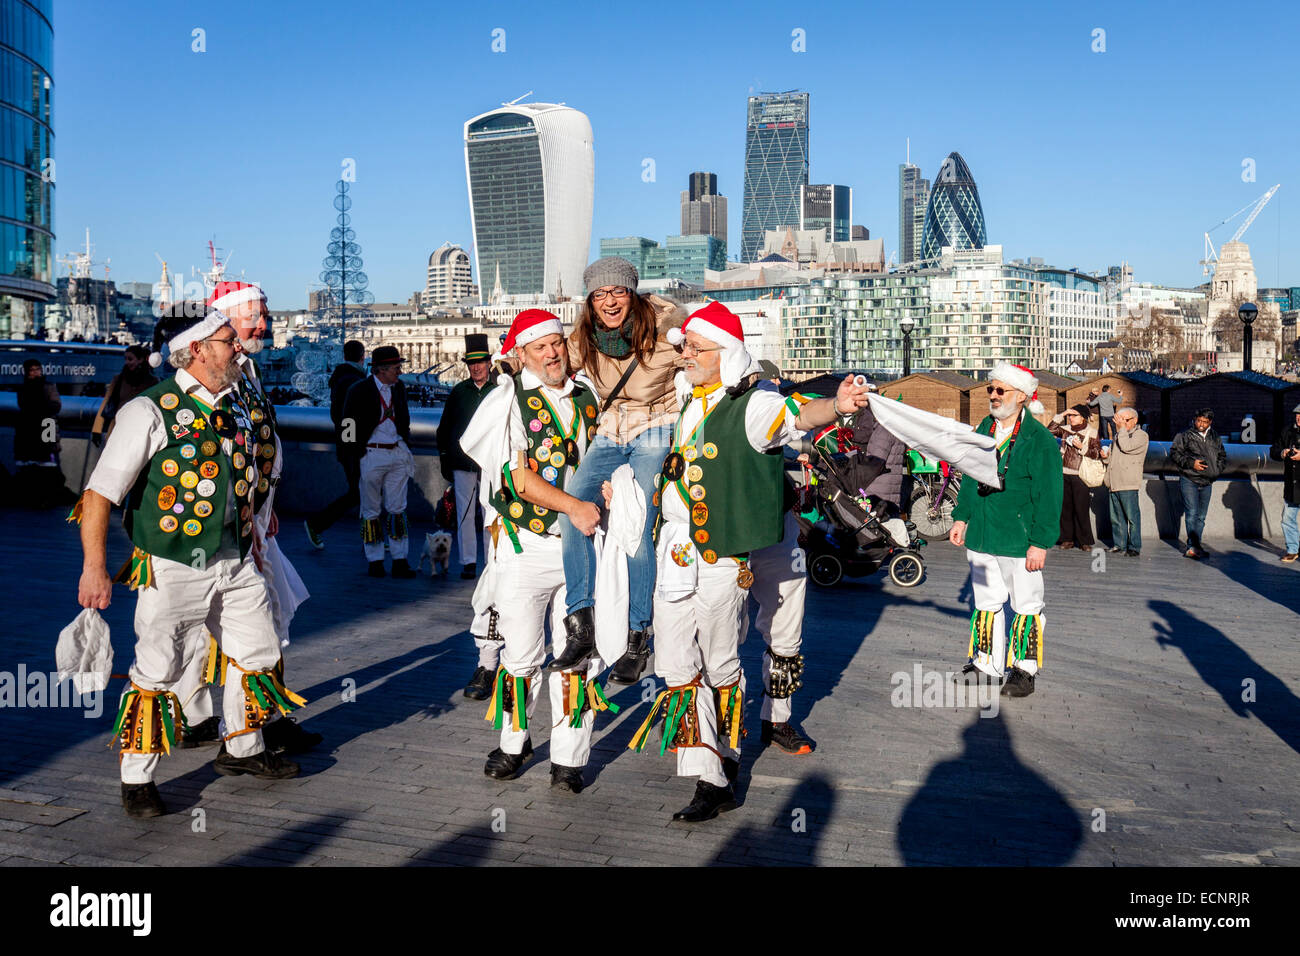 A Female Italian Tourist Is Held Aloft After Dancing With The North Wood Morris Men Outside City Hall, London, England Stock Photo